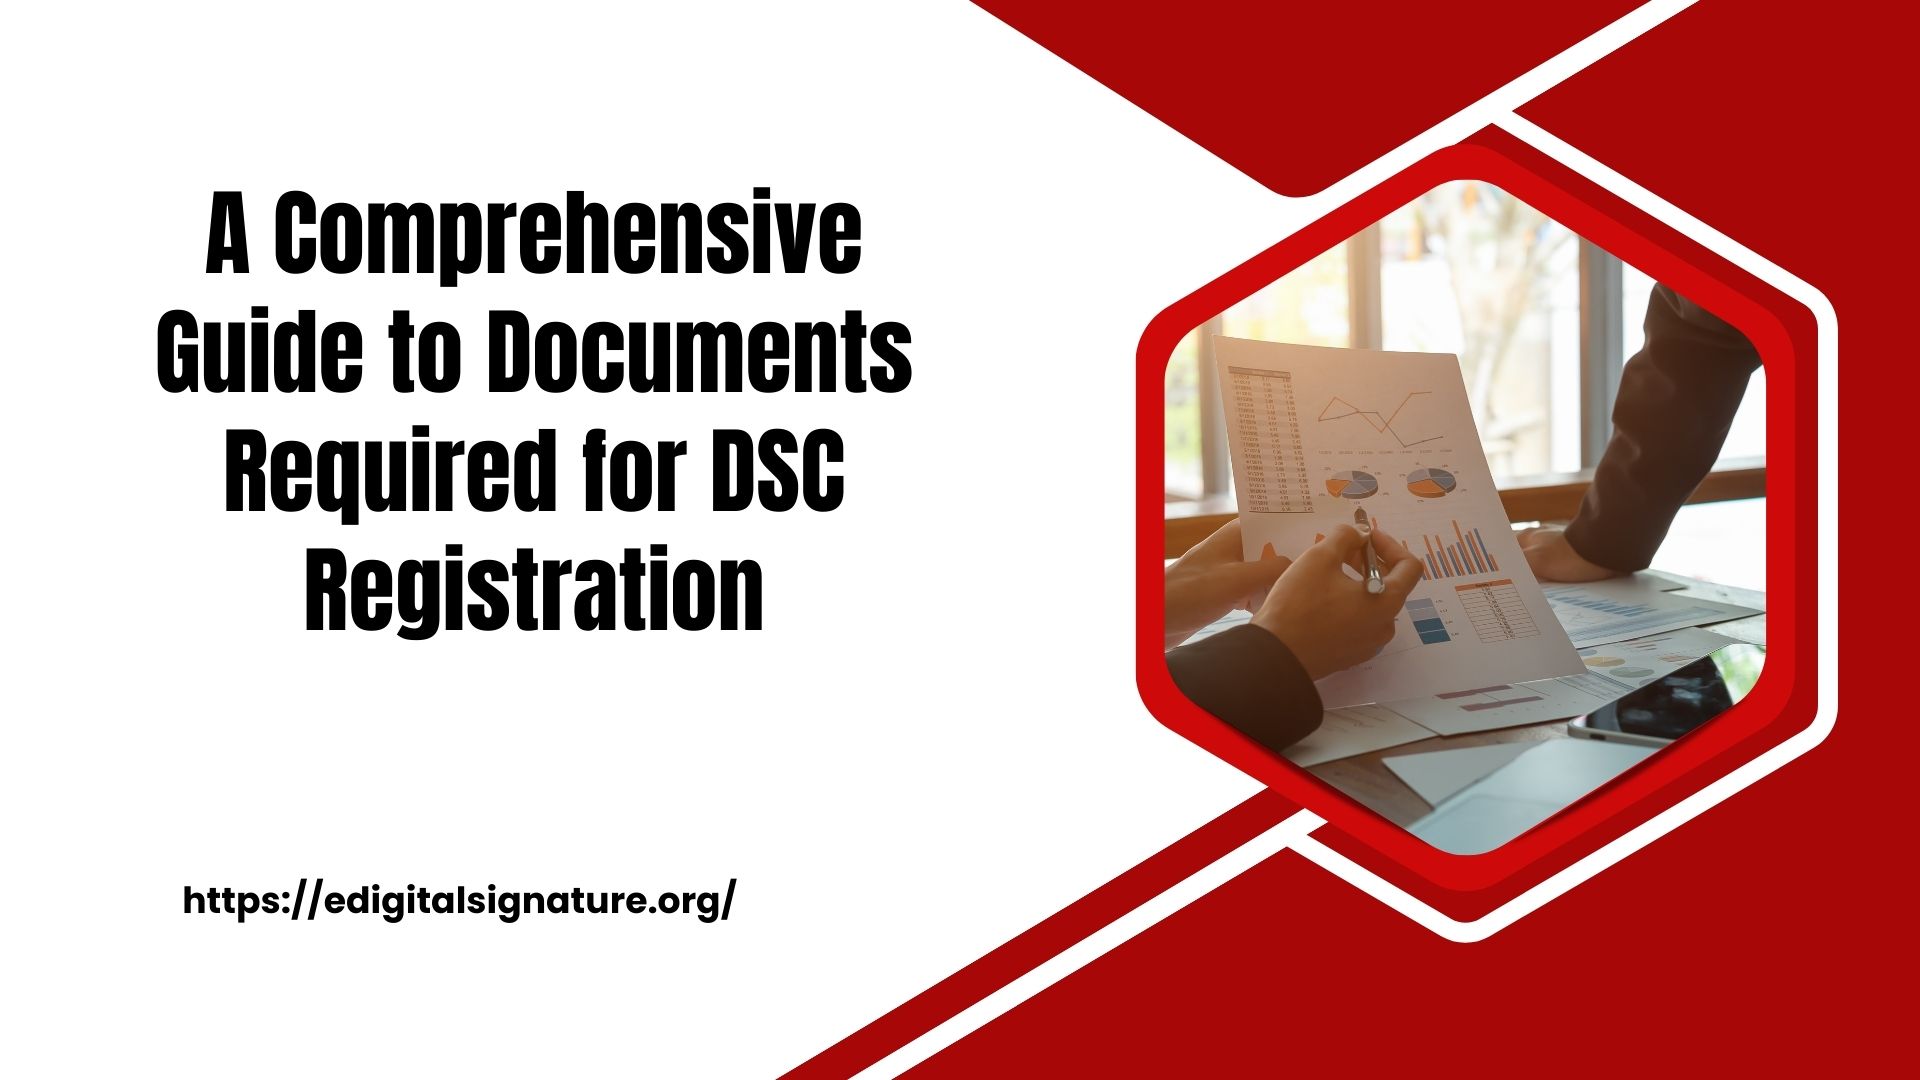 A Comprehensive Guide to Documents Required for DSC Registration